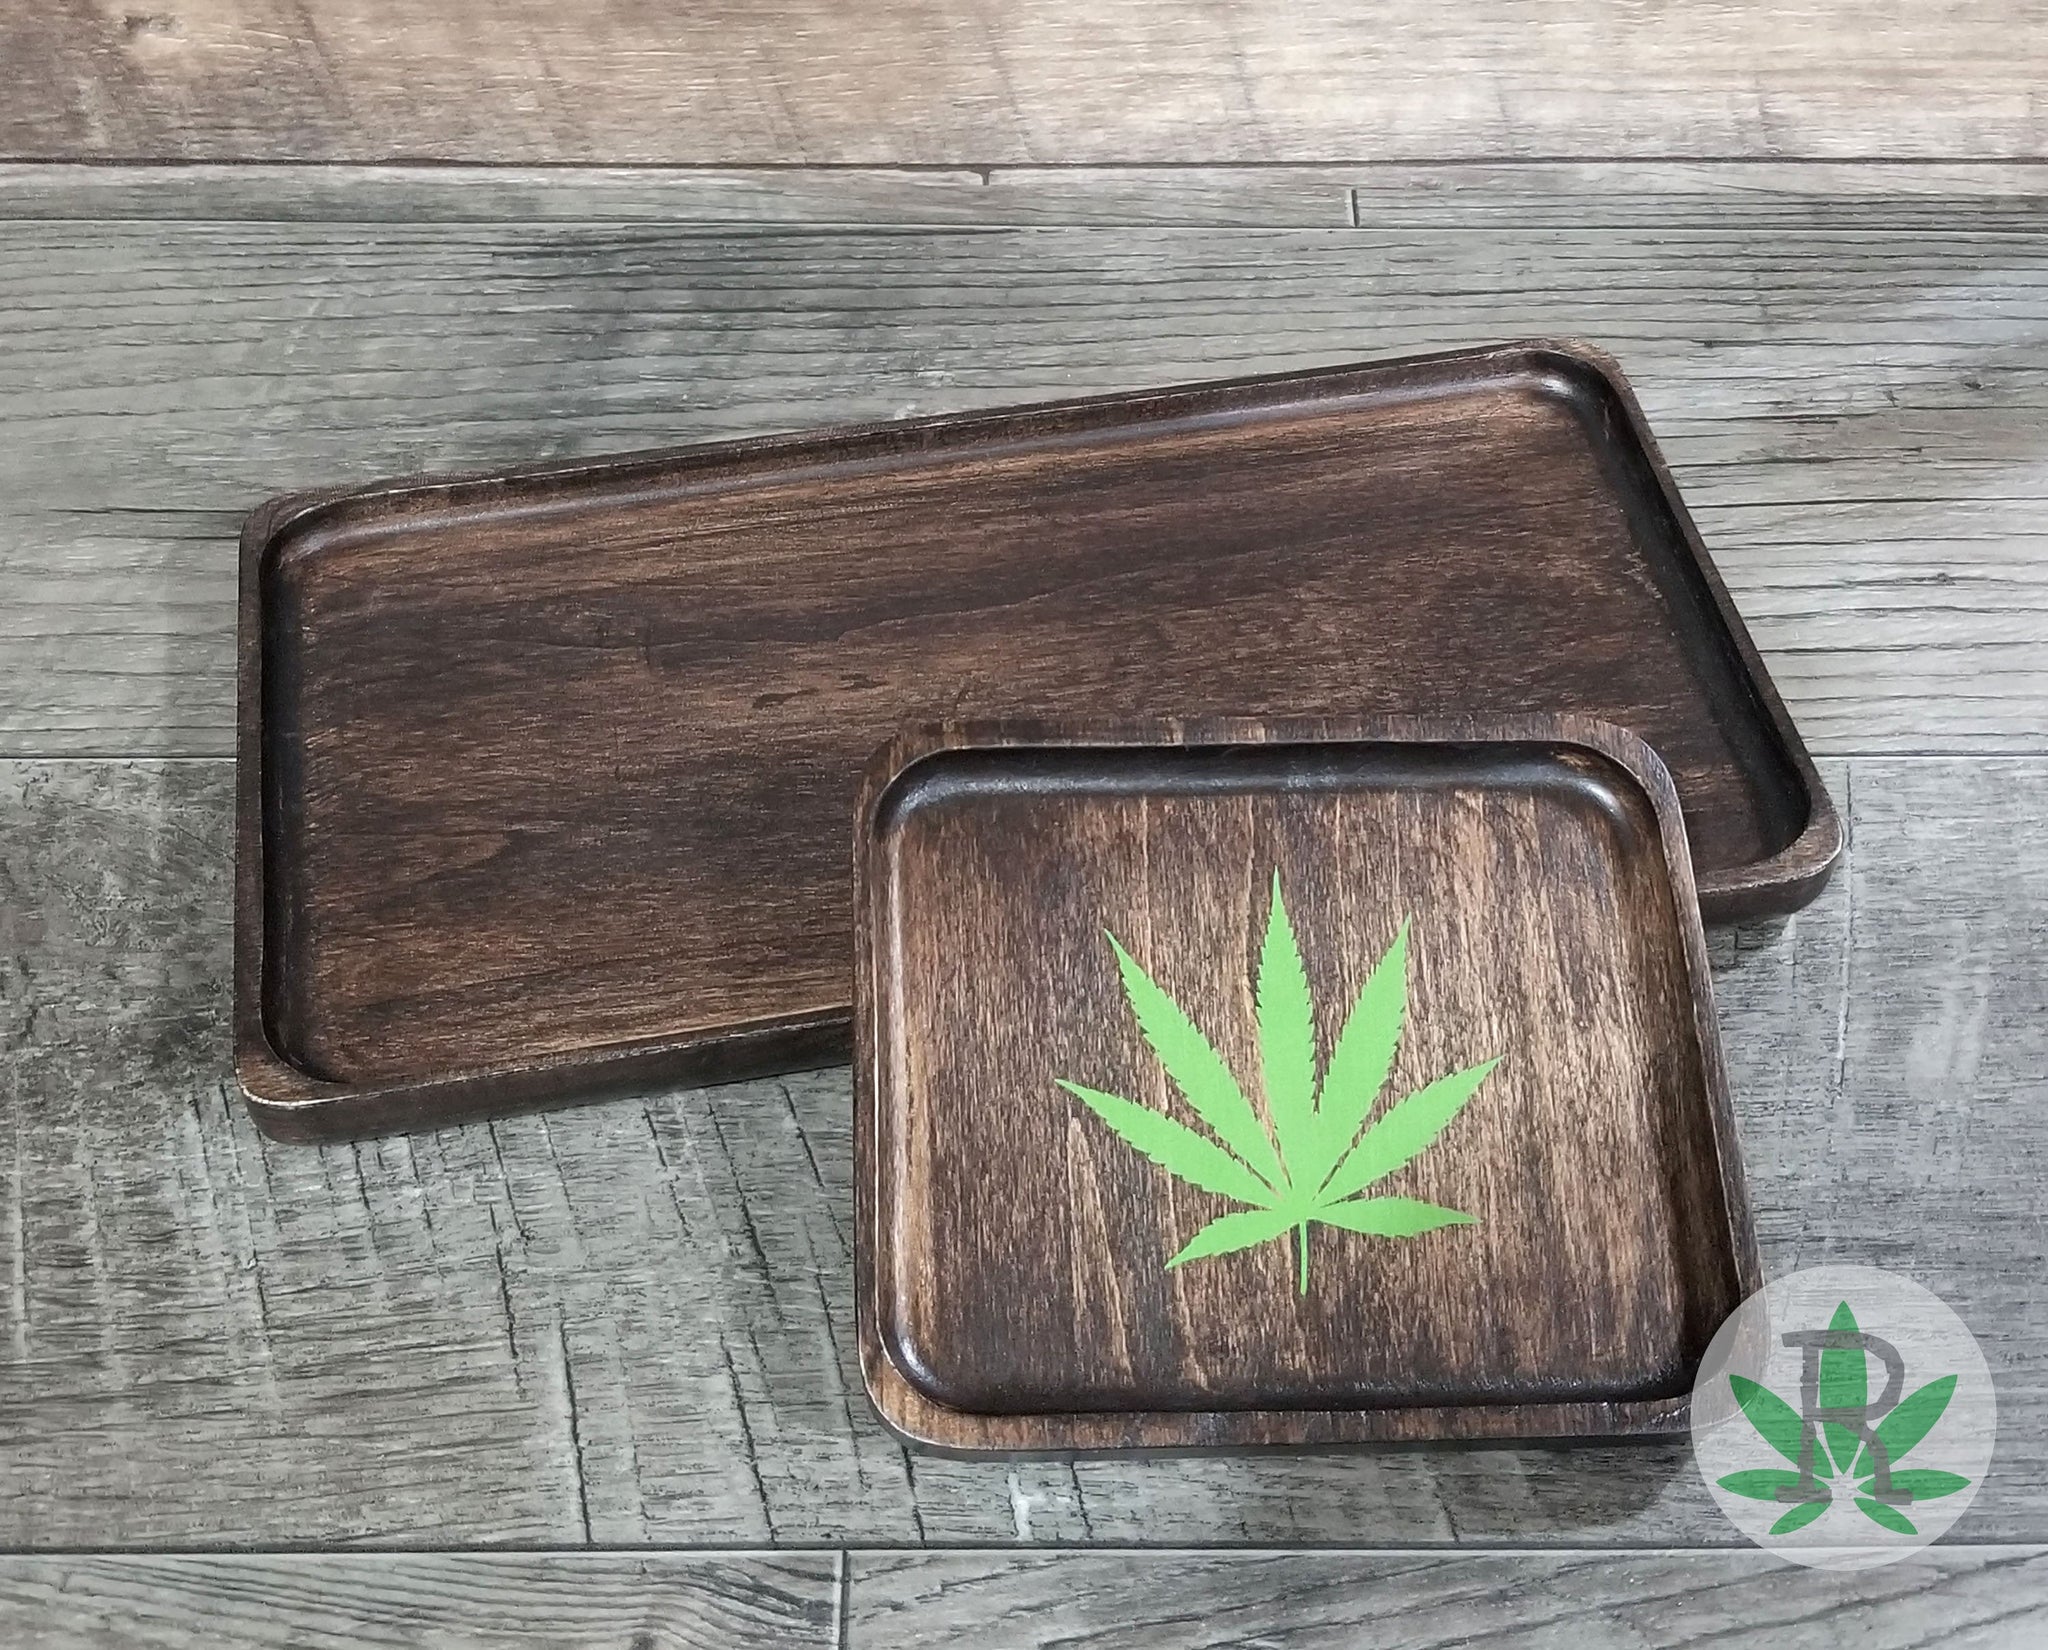 Wood Rolling Tray with Quote Inhale Exhale, Cannabis or Tobacco